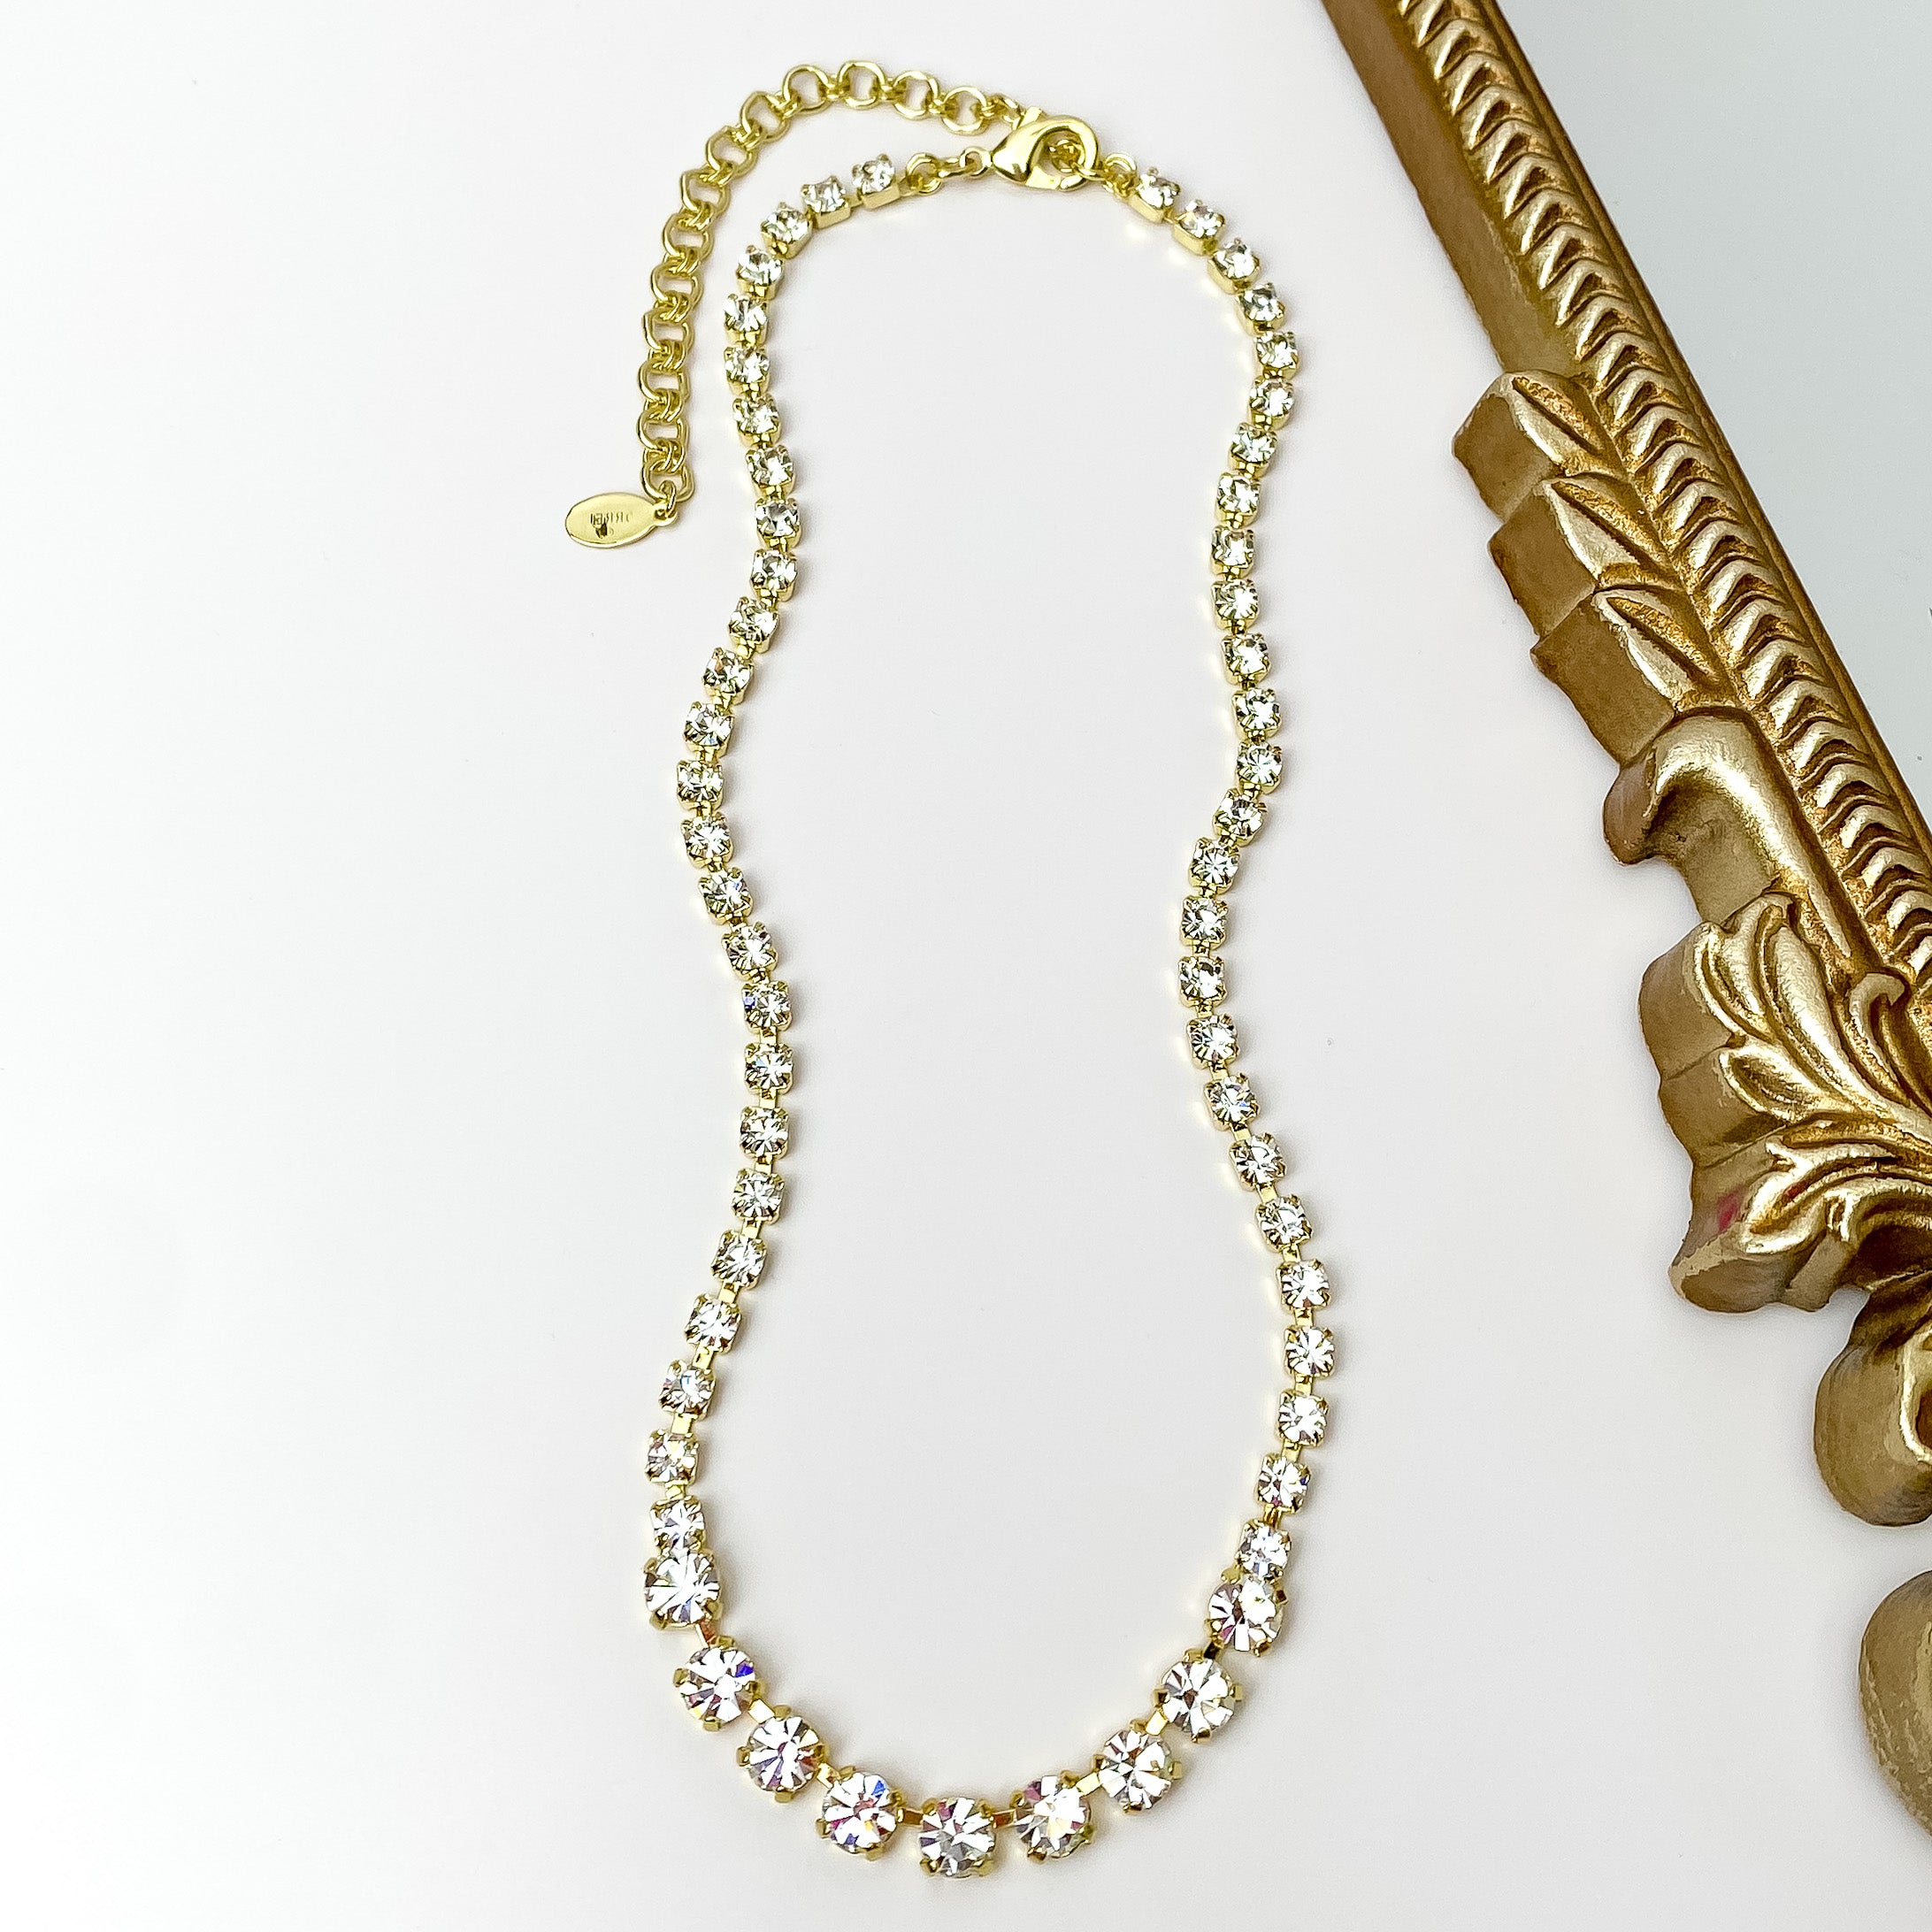 Pictured is a gold necklace with clear crystals. This necklace is pictured on a white background with a gold mirror on the right side.